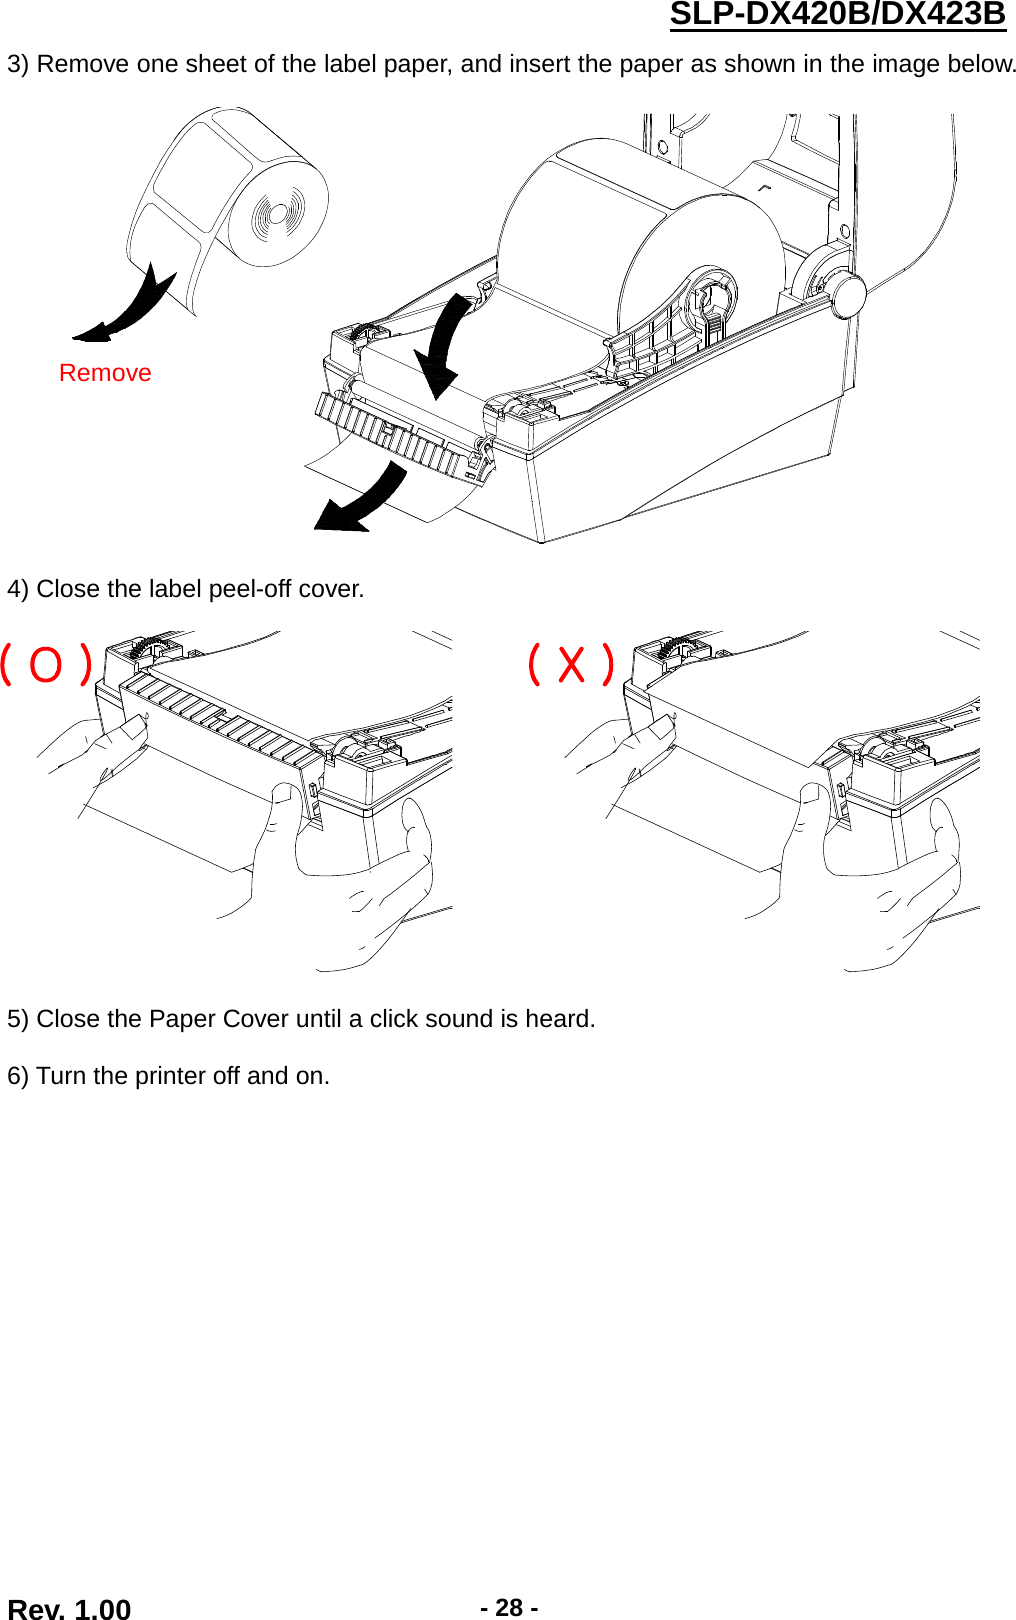  Rev. 1.00 - 28 - SLP-DX420B/DX423B  3) Remove one sheet of the label paper, and insert the paper as shown in the image below.      4) Close the label peel-off cover.    5) Close the Paper Cover until a click sound is heard.  6) Turn the printer off and on.   Remove ( O ) ( X ) 